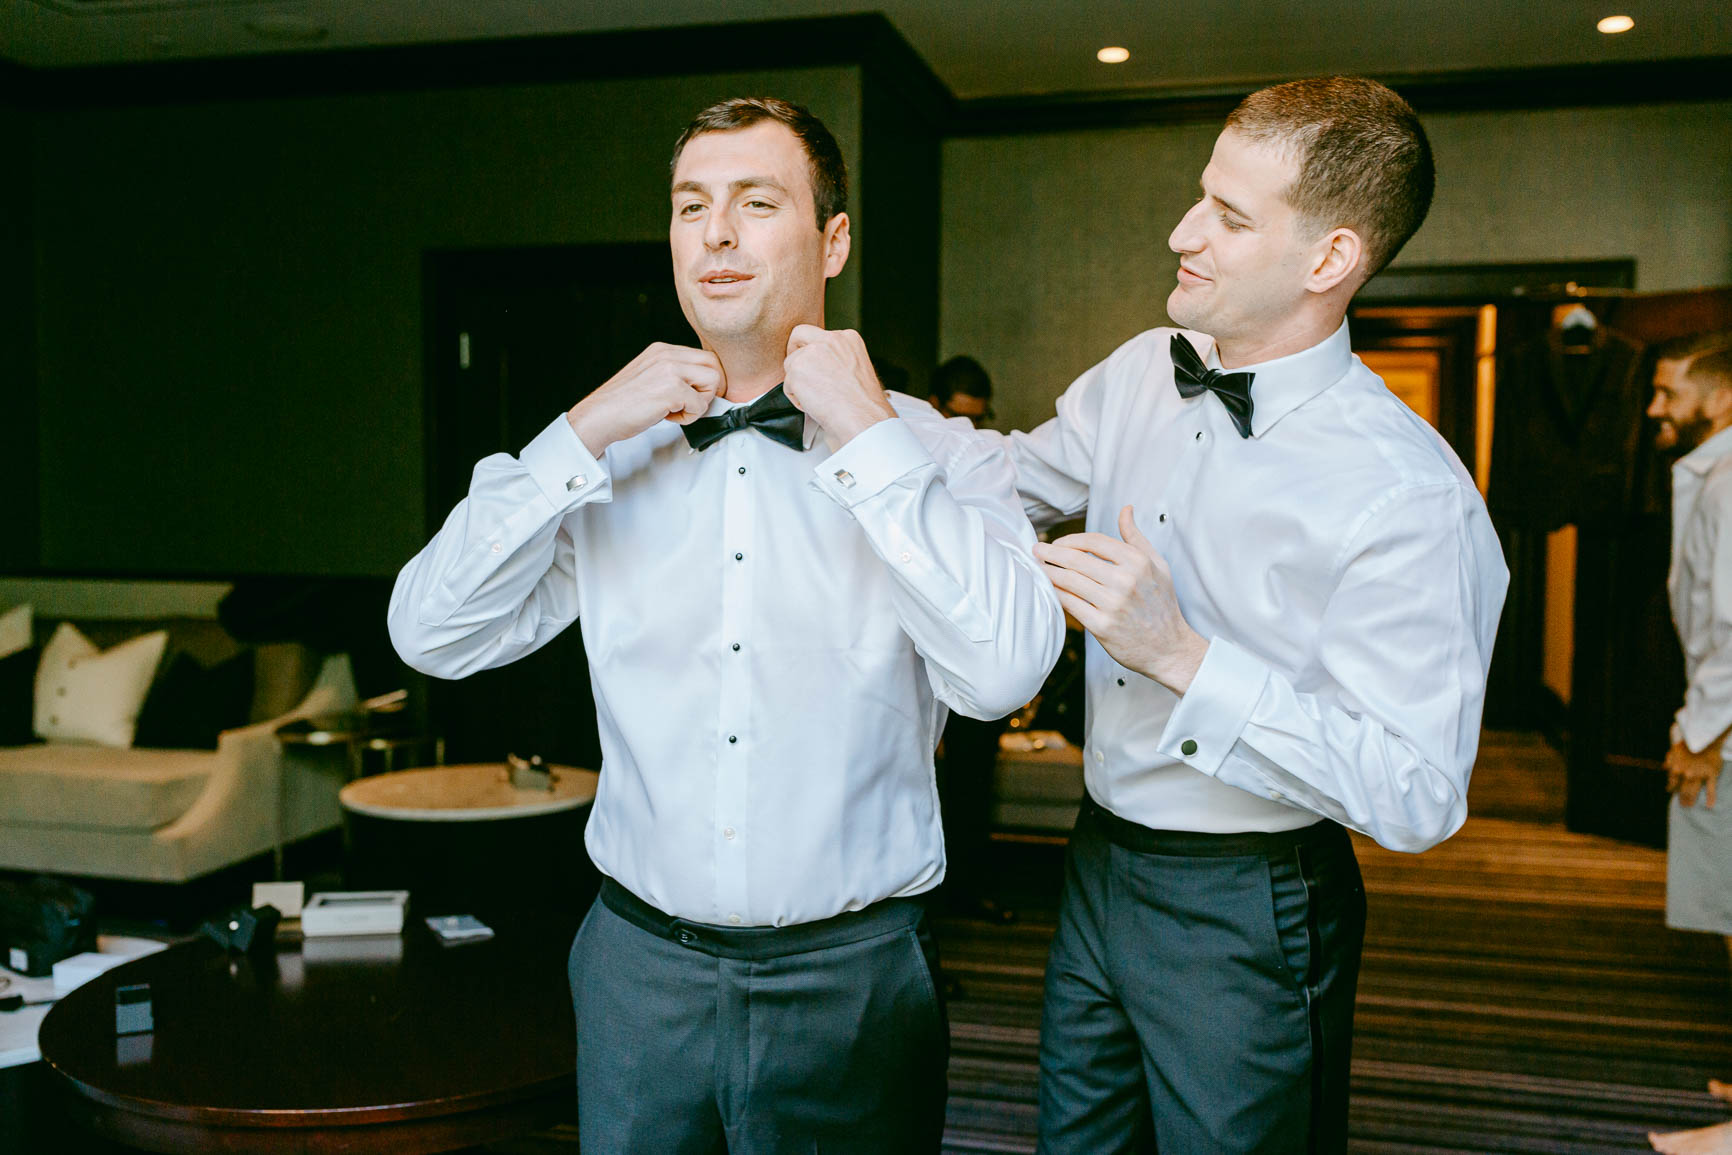 groom and groomsman getting ready in uptown Charlotte hotel shot by Nhieu Tang photography | nhieutang.com